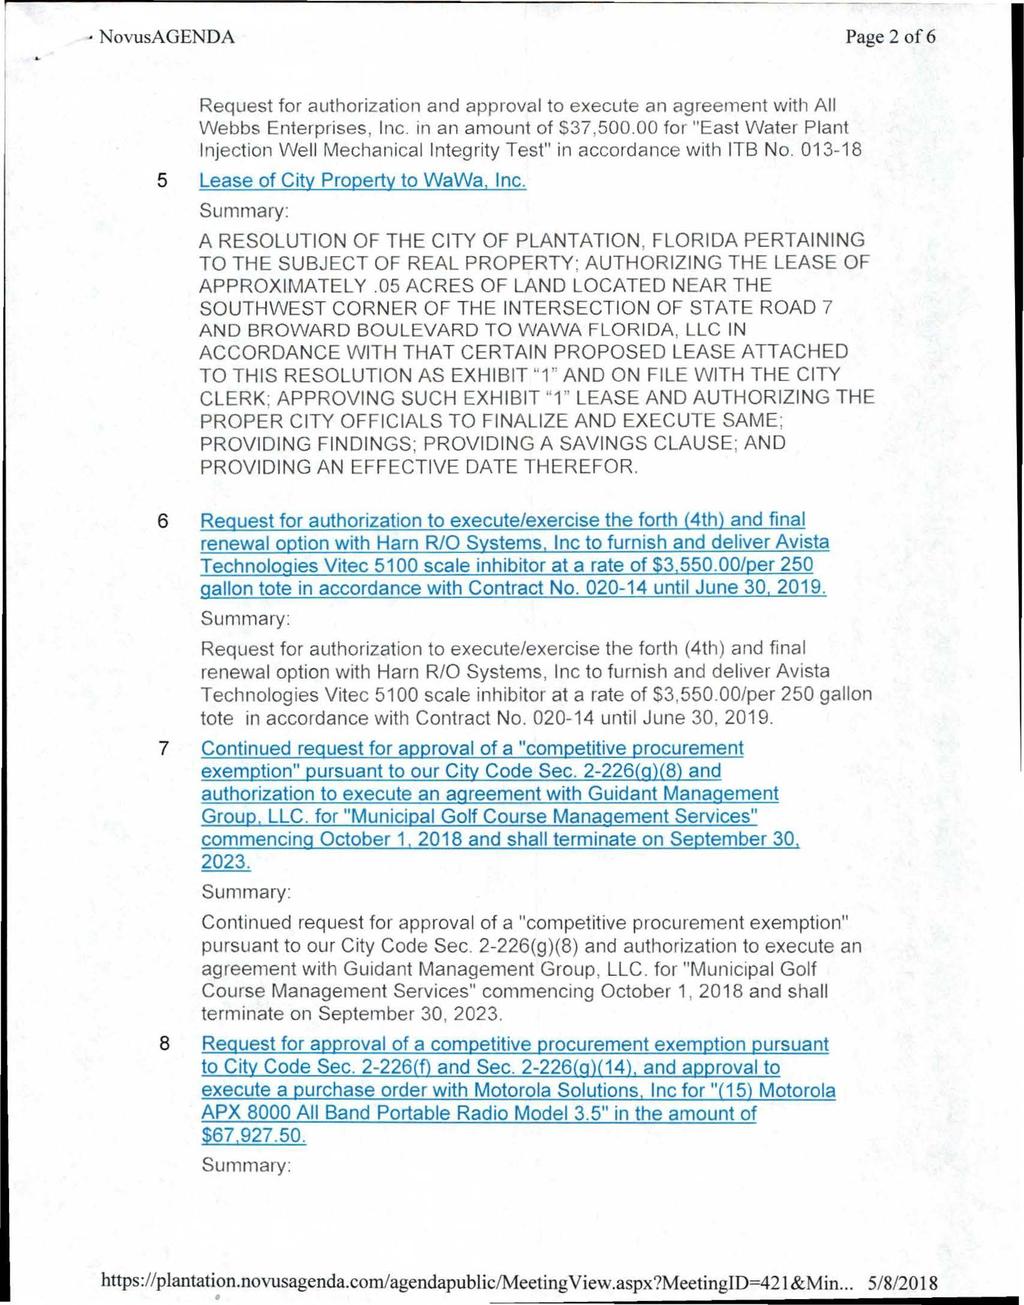 NovusAGENDA Page 2 of6 Request for authorization and approval to execute an agreement with All Webbs Enterprises, Inc. 1n an amount of 537,500.